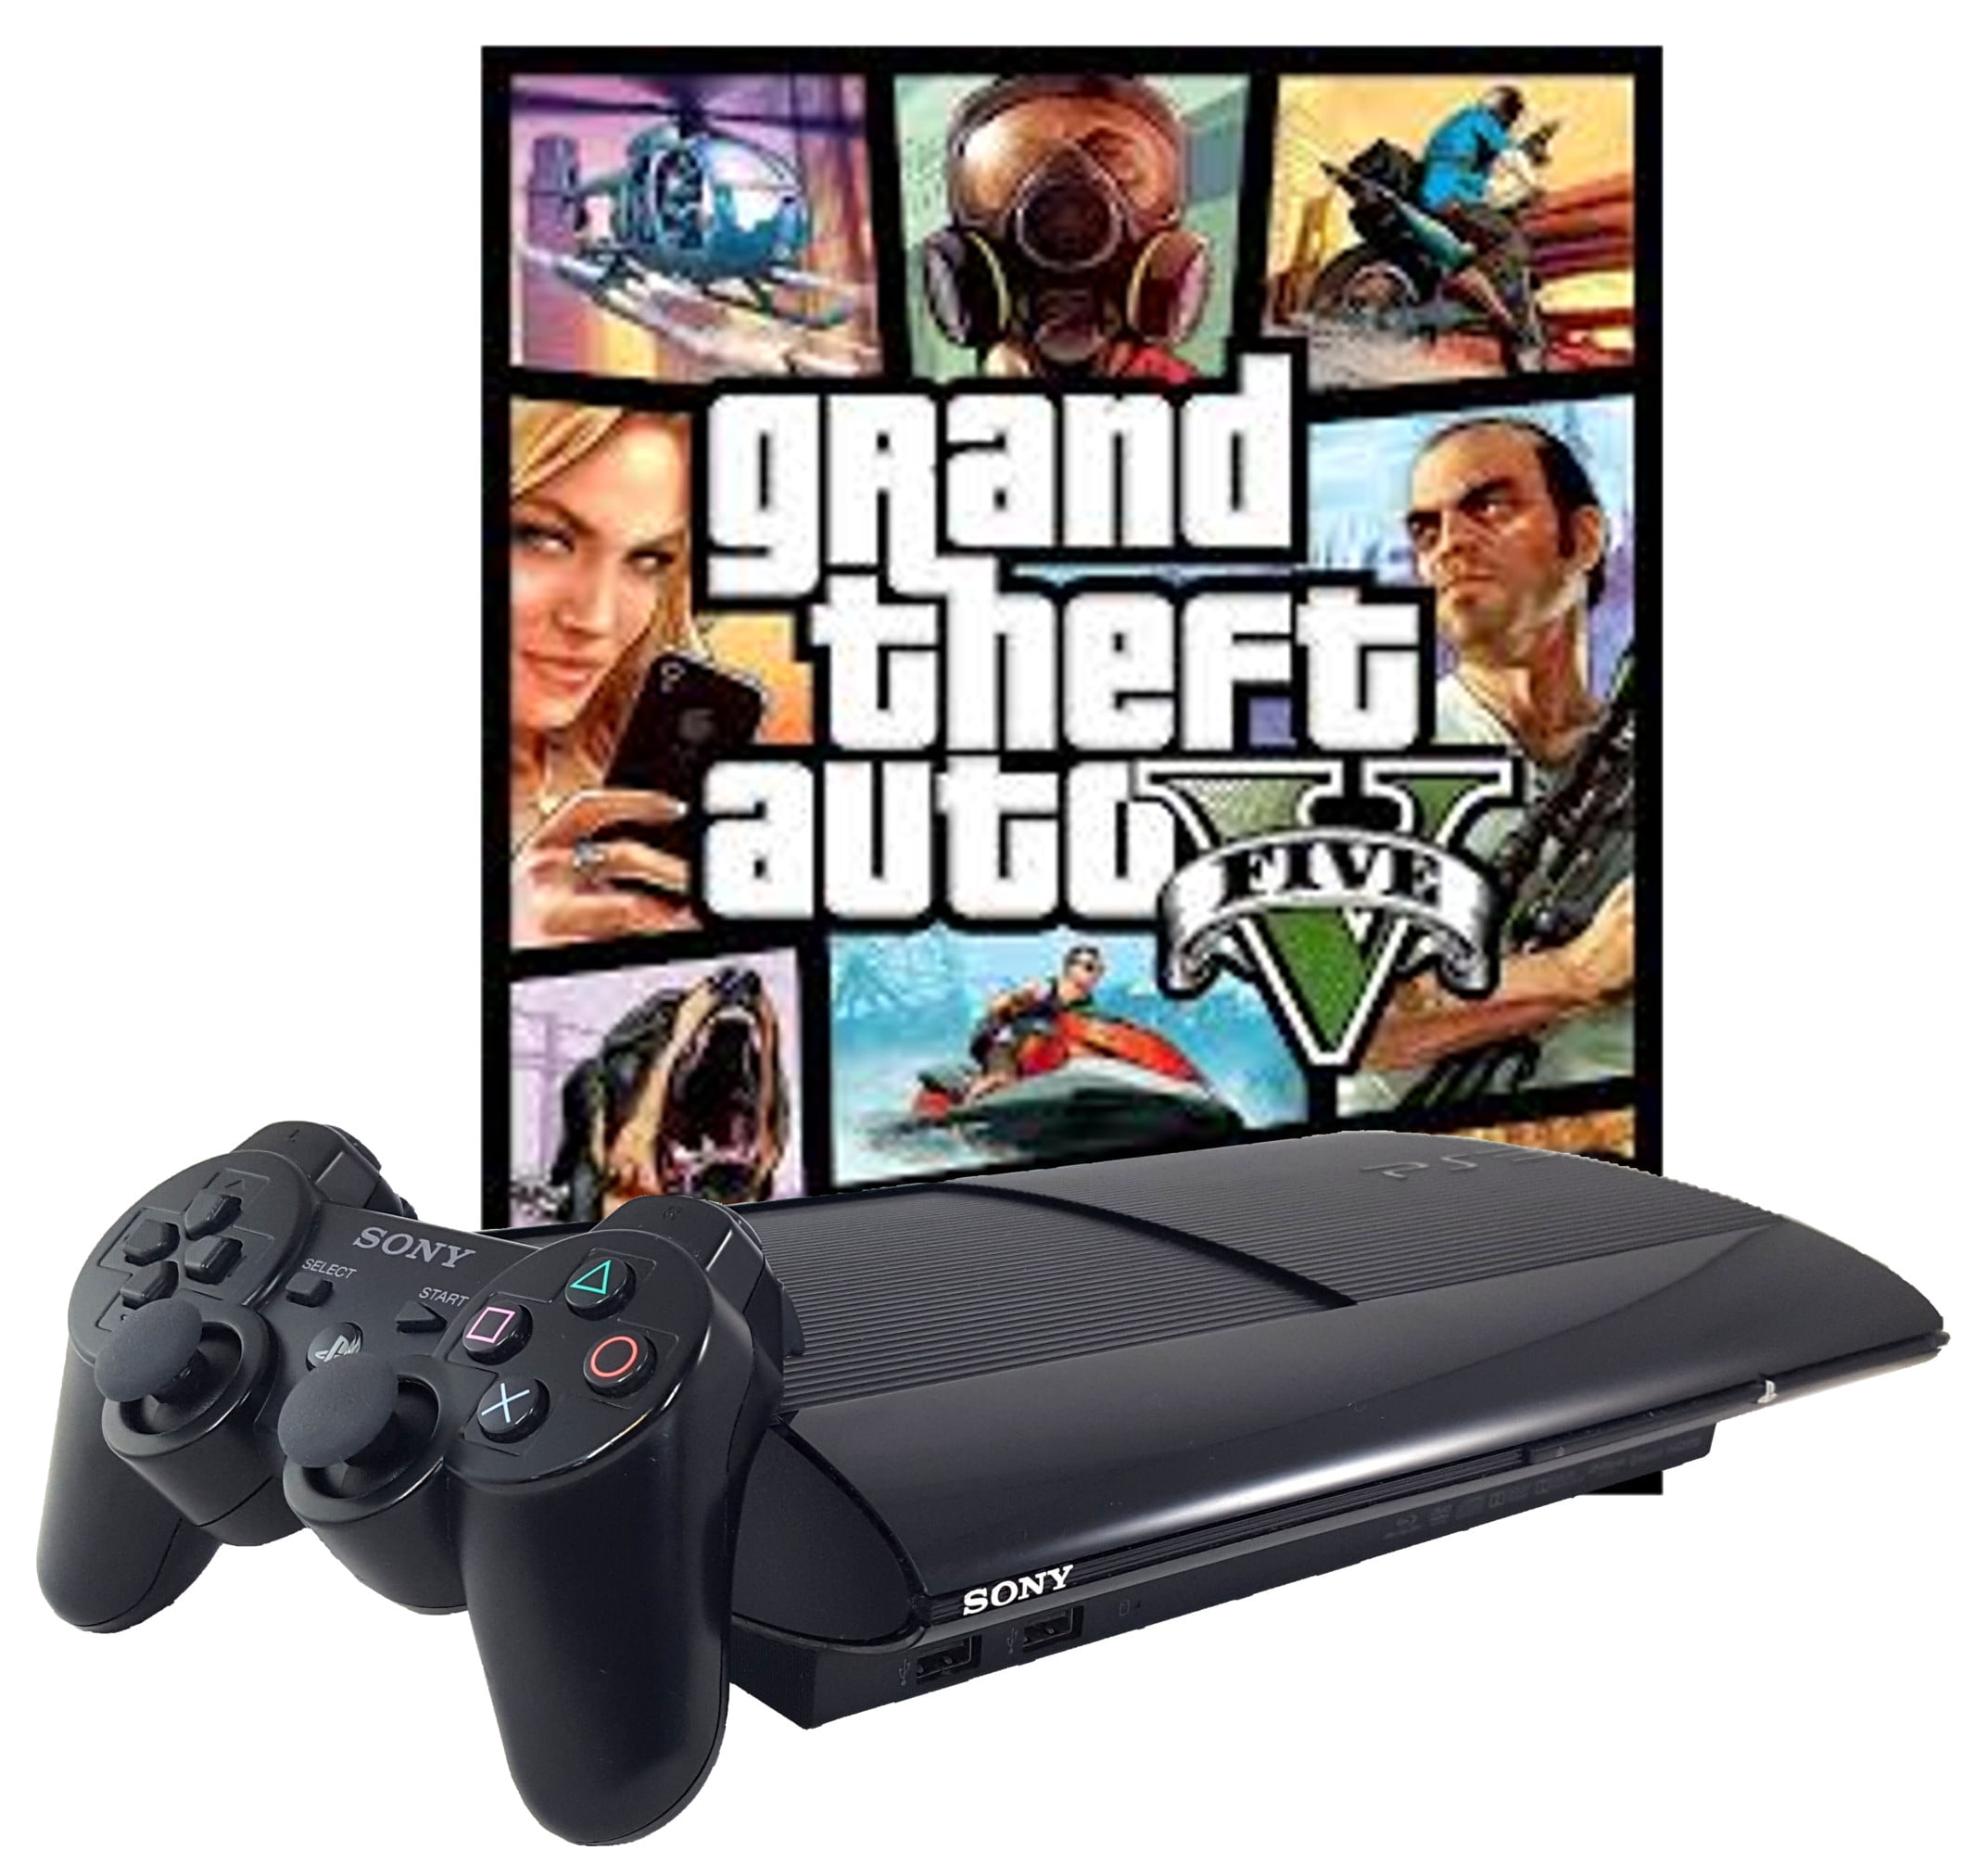 Do I have to buy GTA V again for ps5 console?, by vgstores